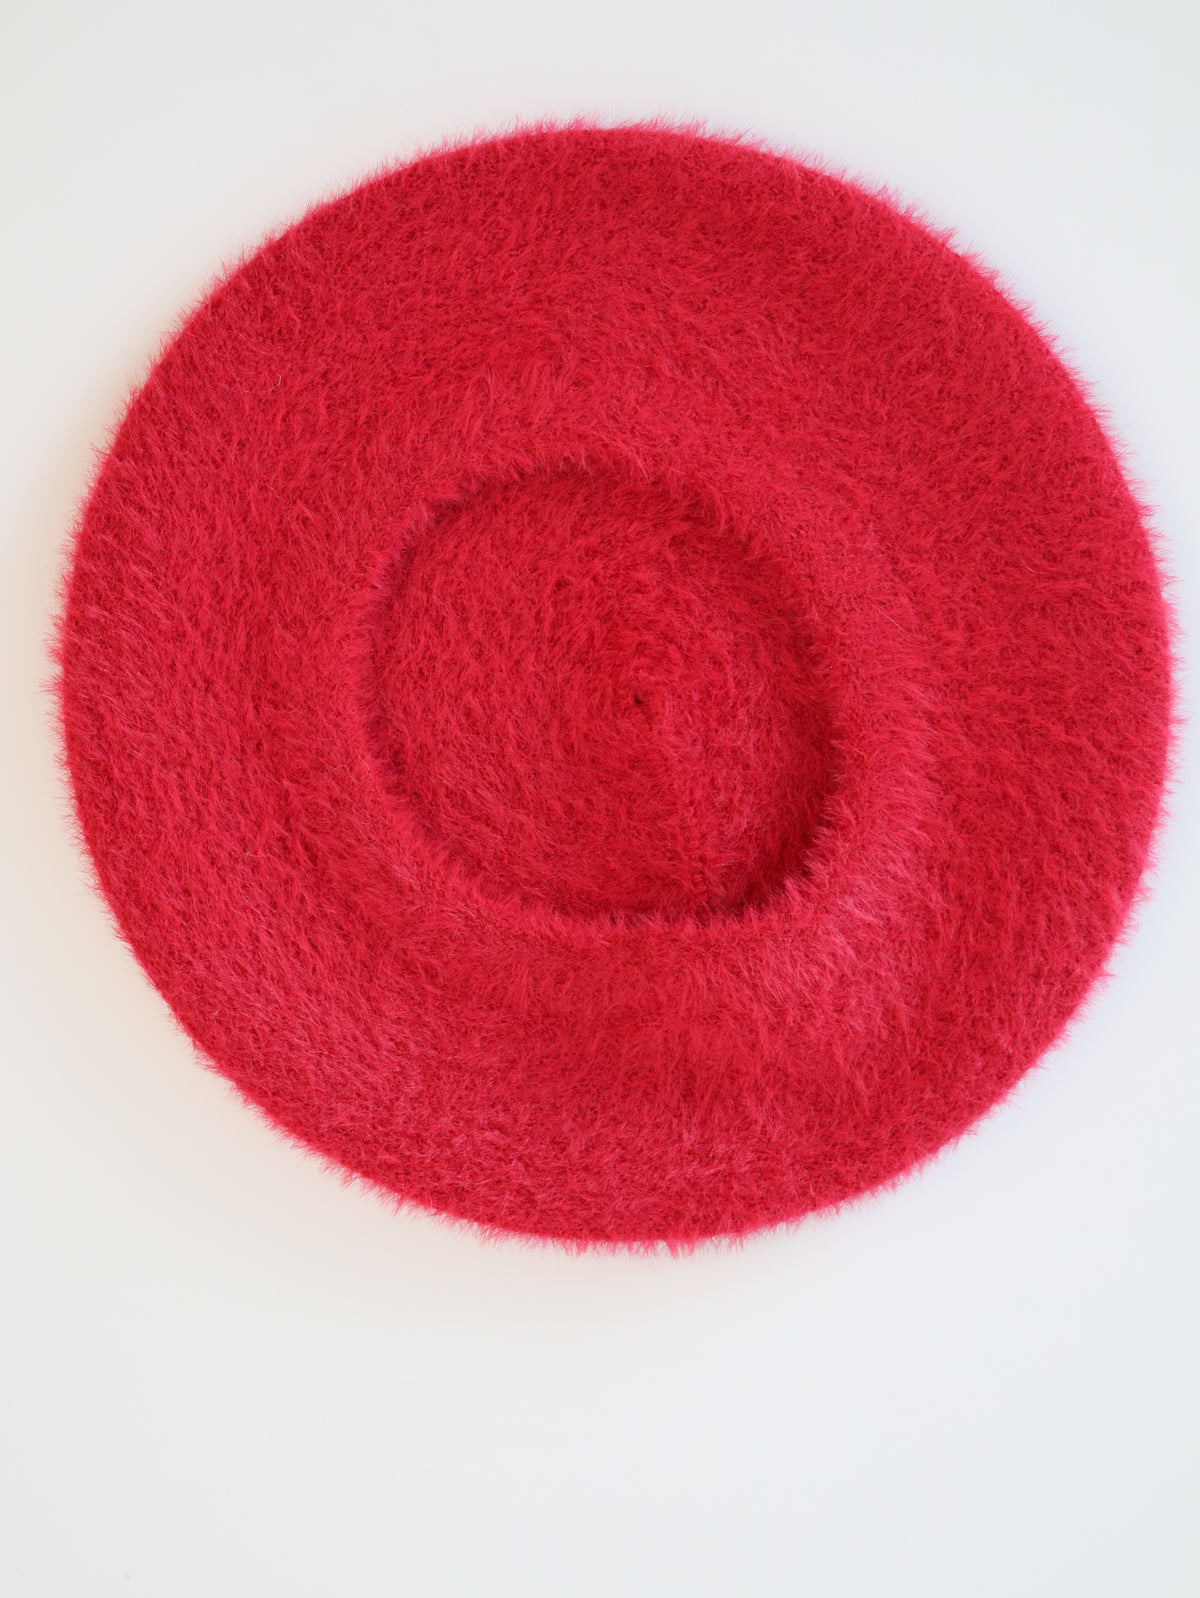 Beret Hat in Pink